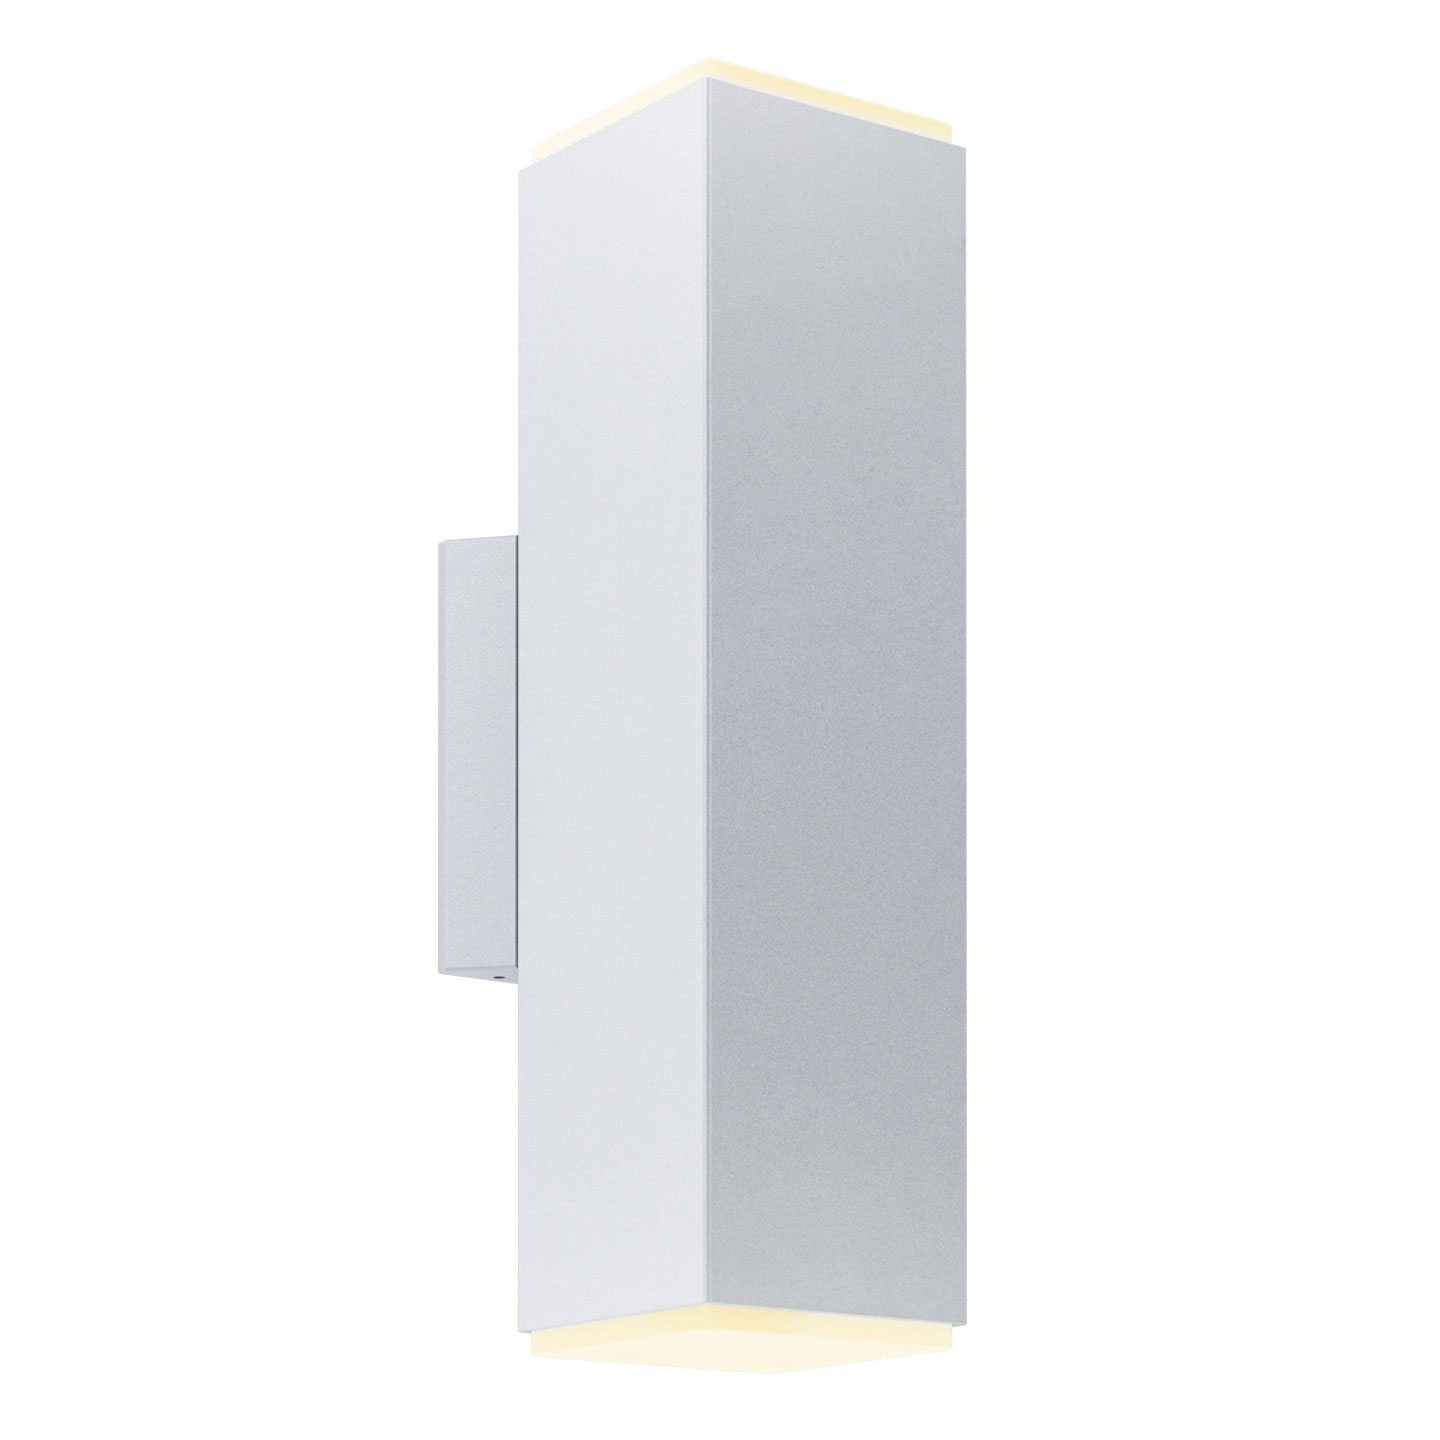 Stair Treads Lamps World Stainless Steel 27cm Rectangular IP65 LED Wall Light Fixture Roni F 